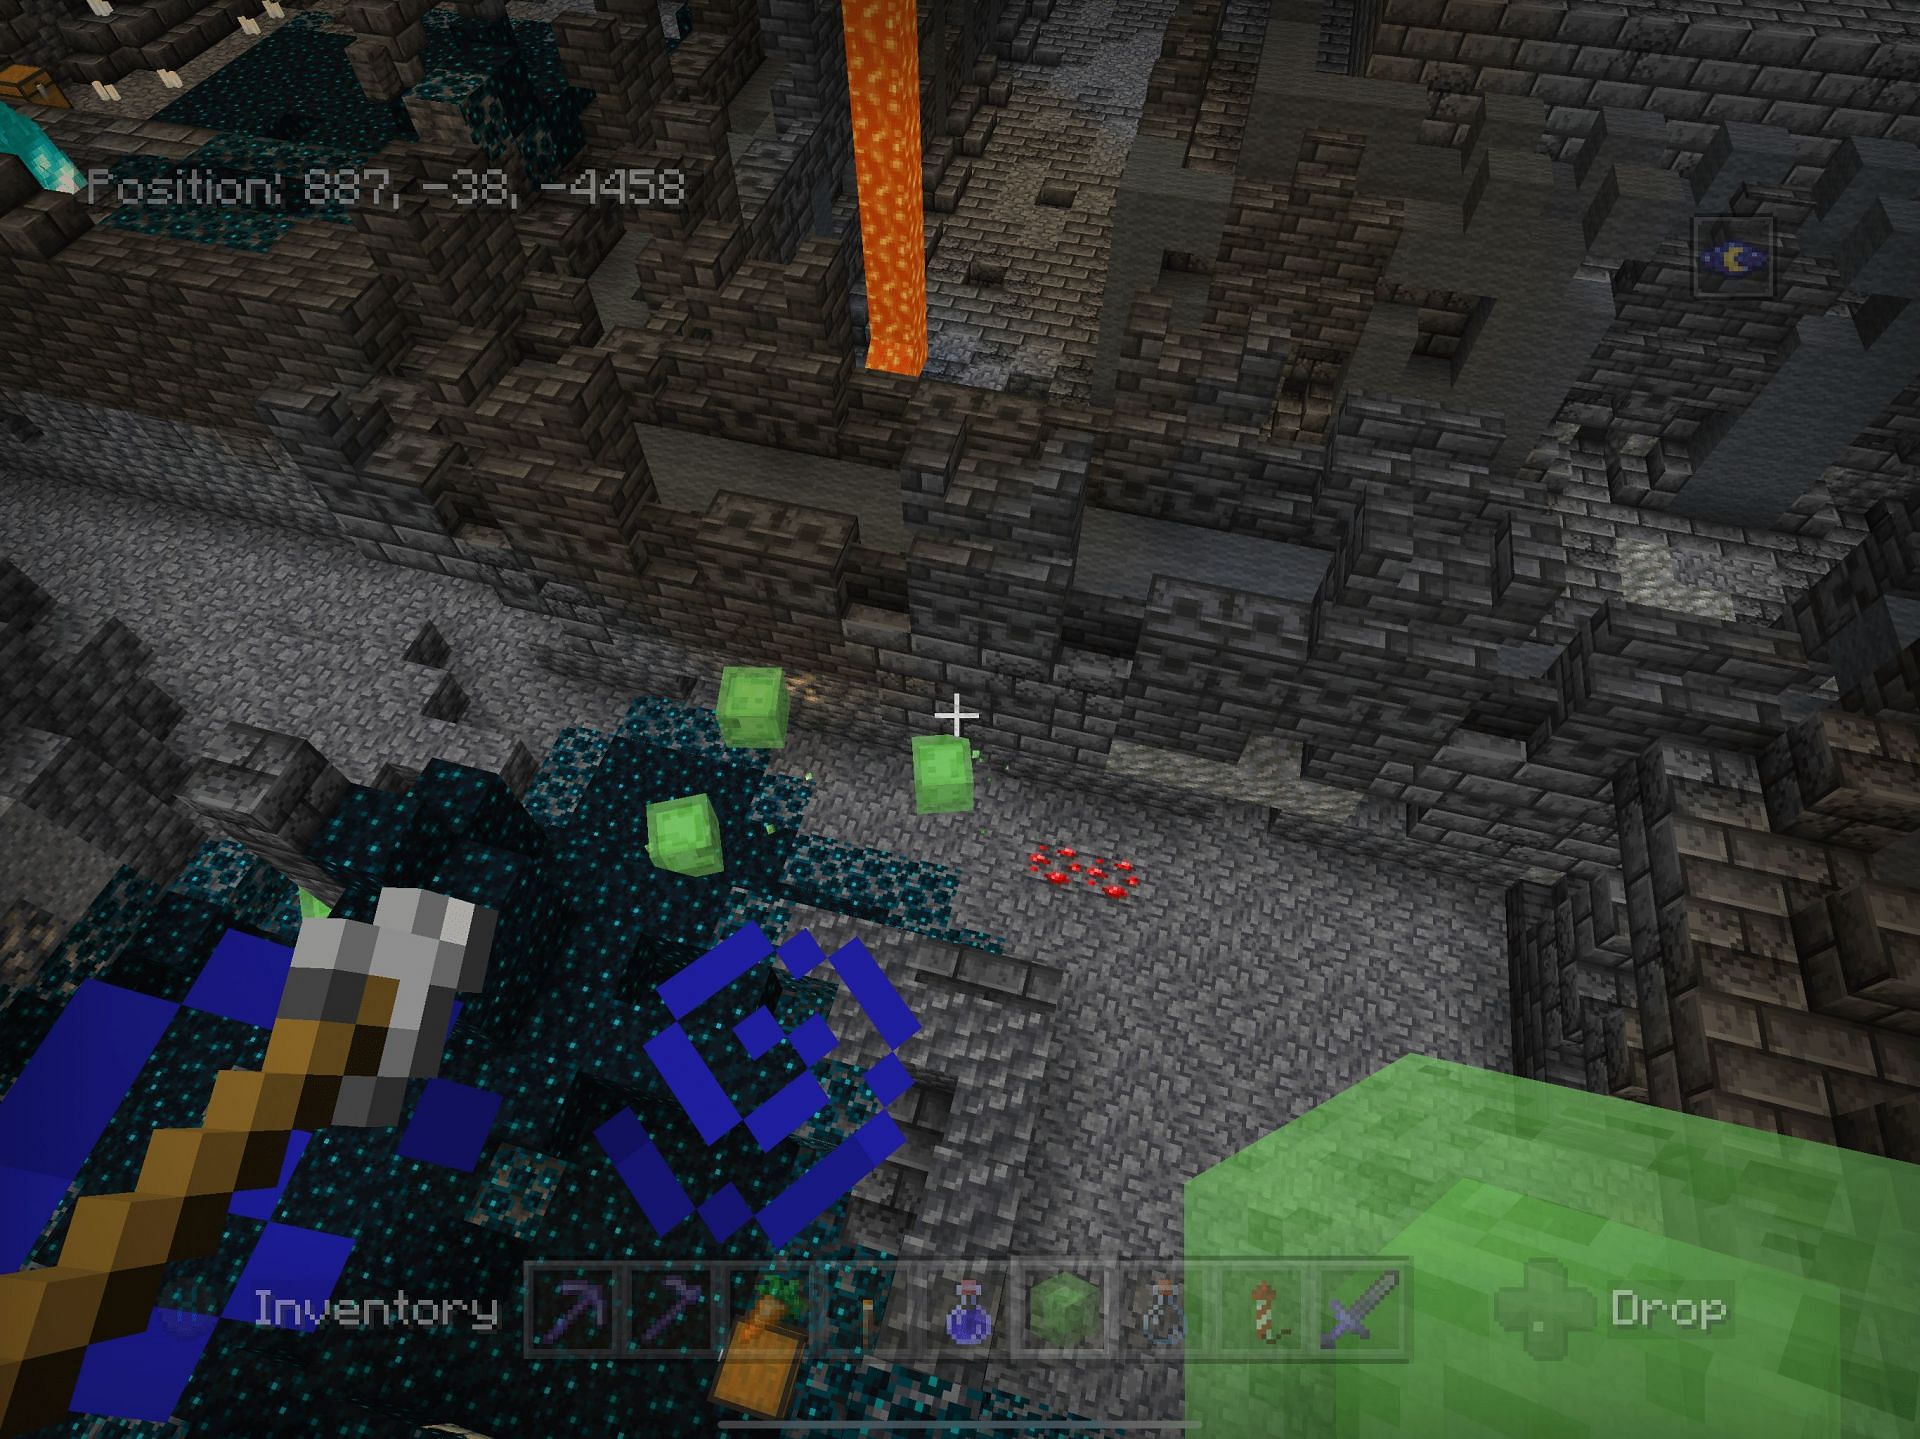 Slimes spawning in an ancient city: MCPE-153524 (Image via Minecraft)